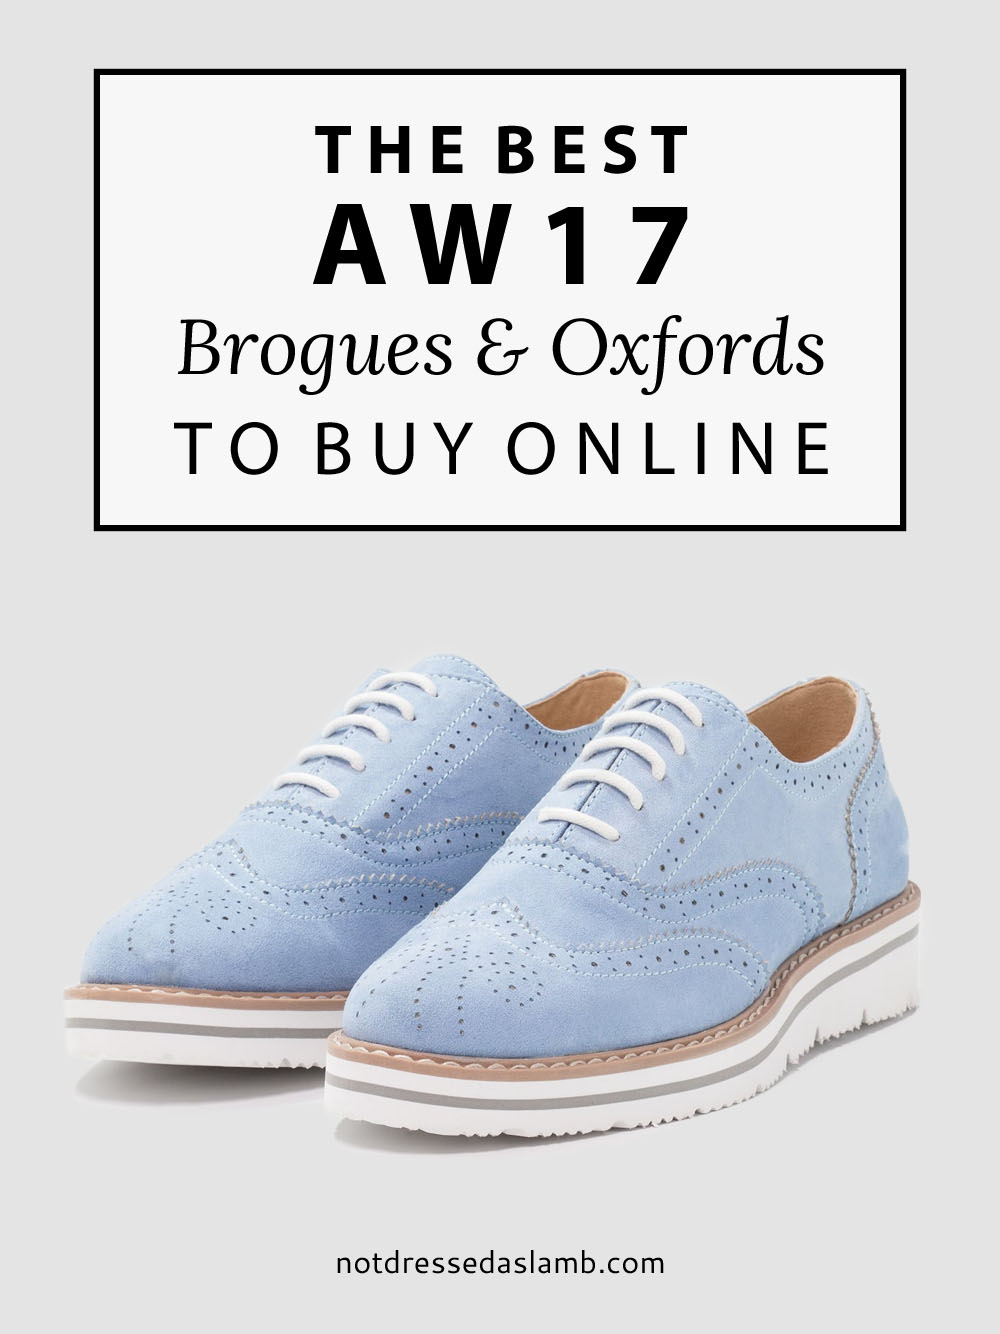 The Best AW17 Brogues, Oxfords and Lace-Ups to Buy Online